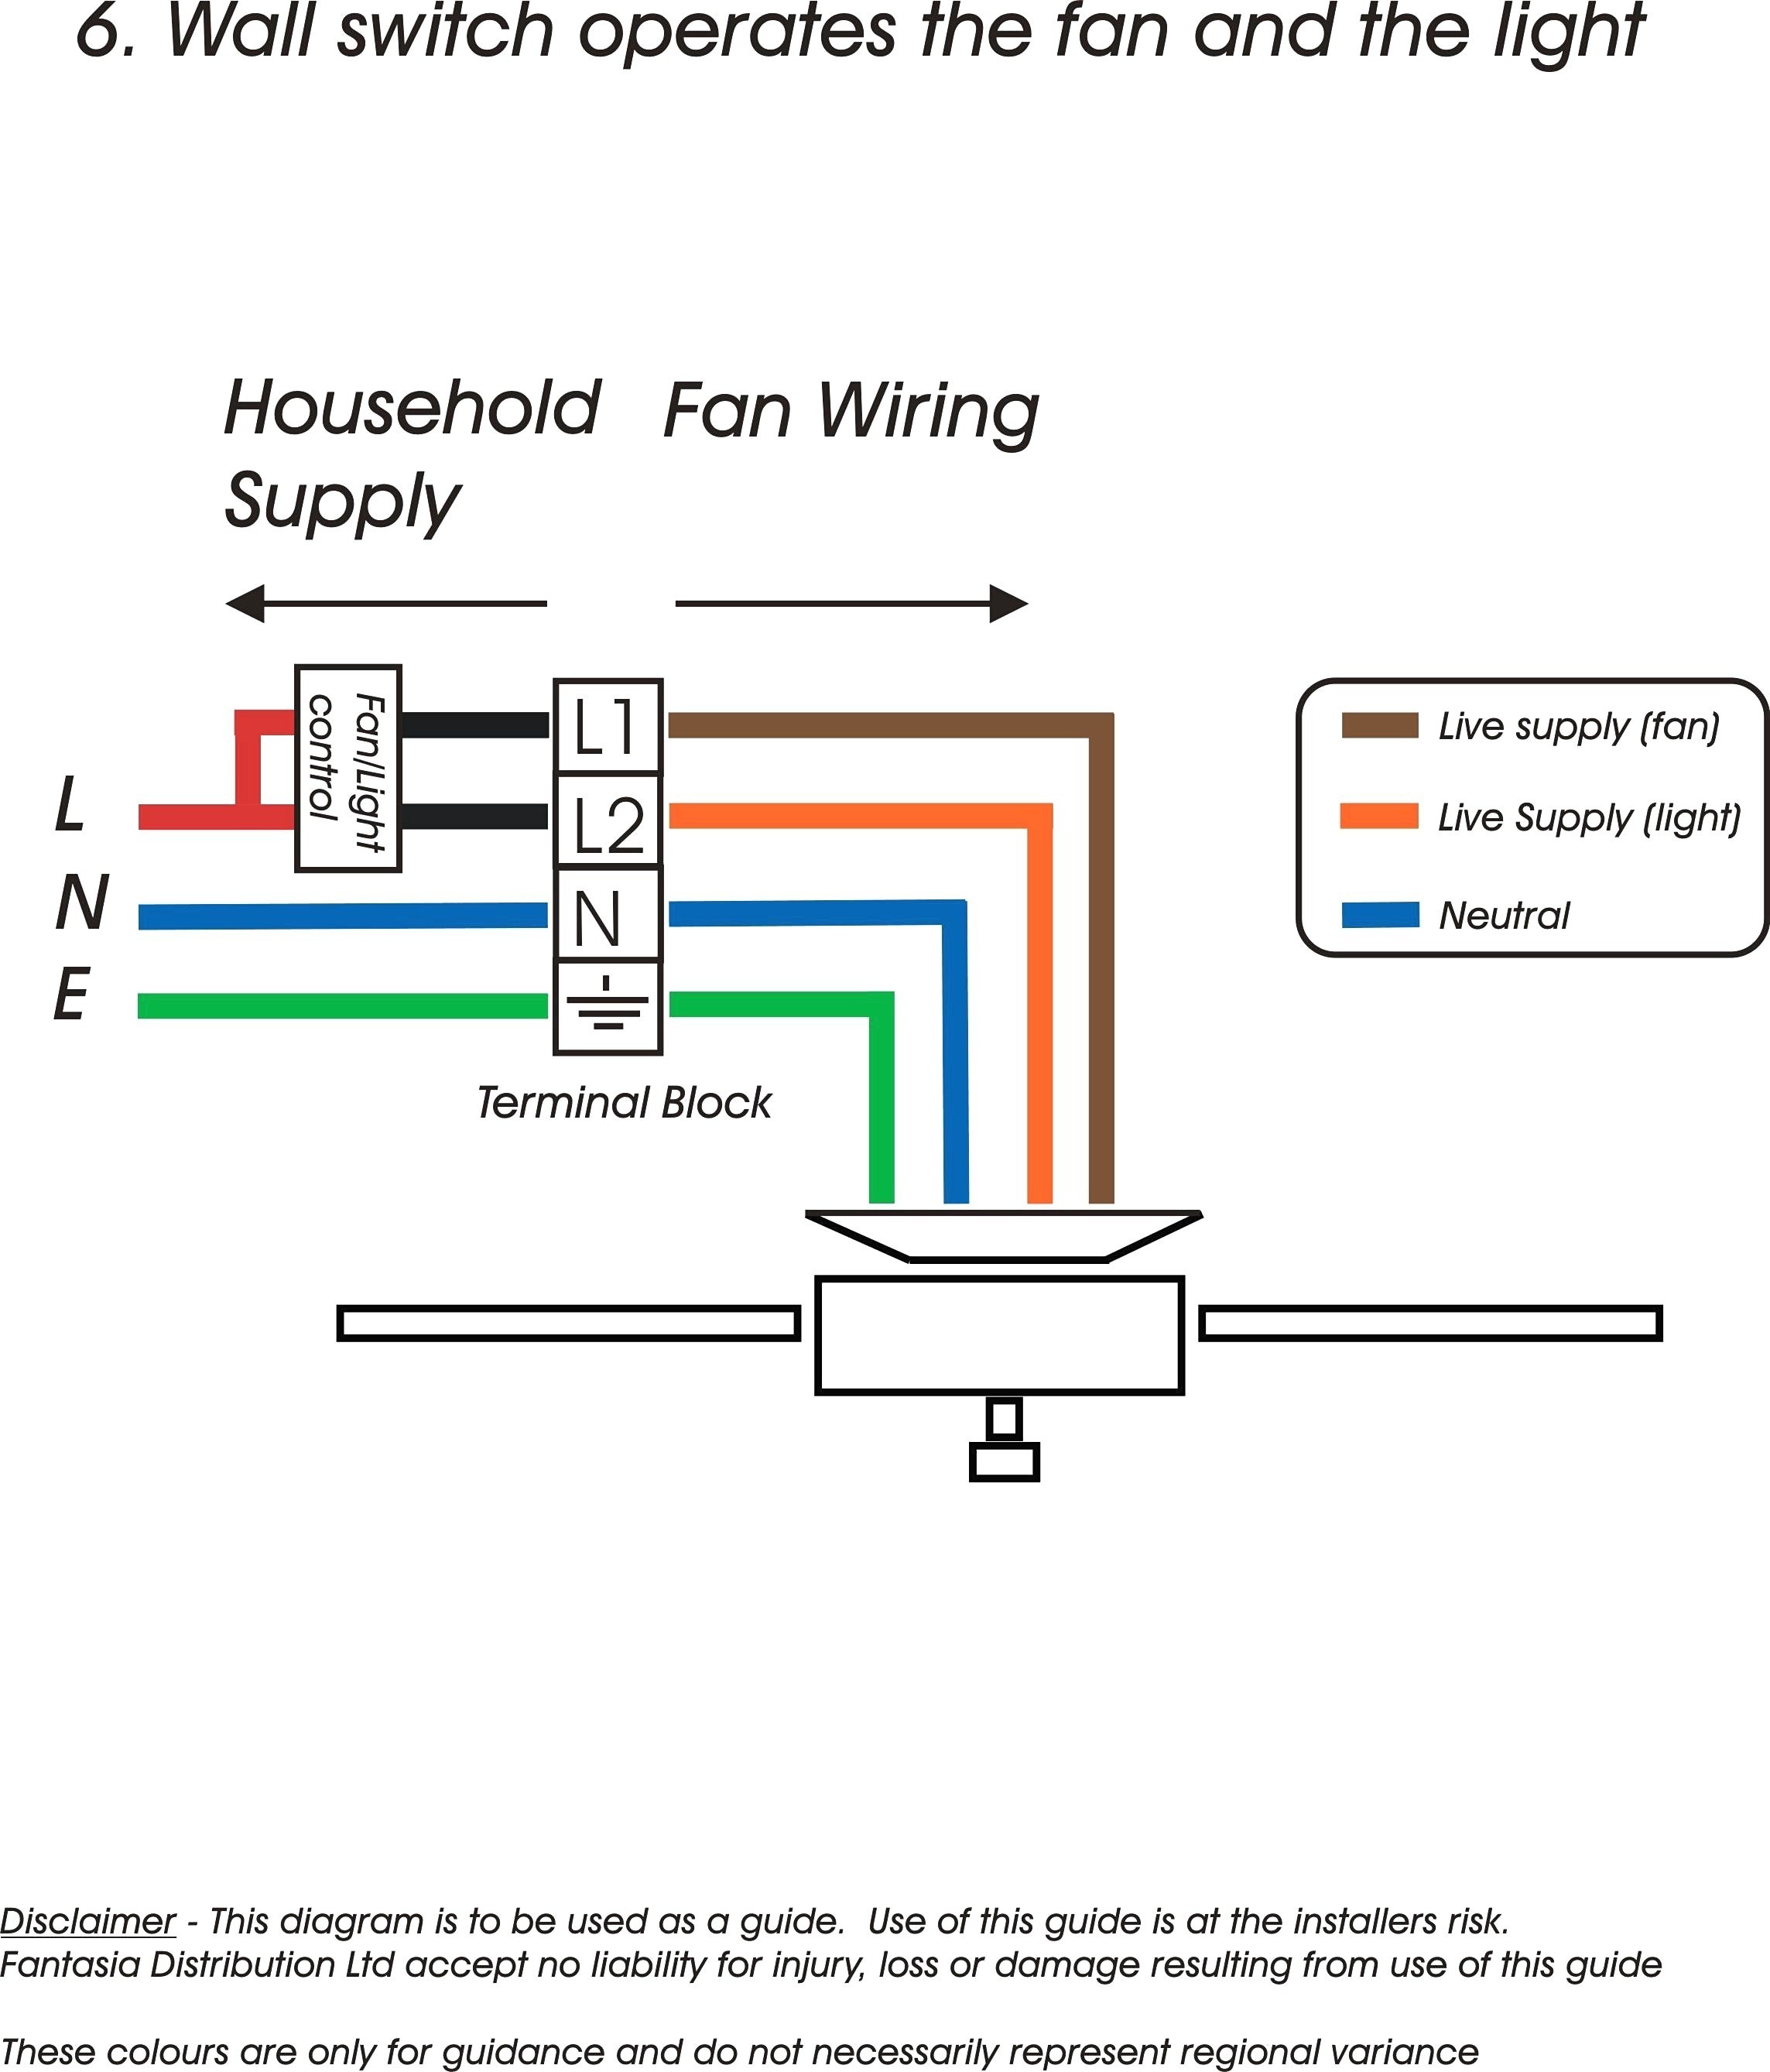 Wiring Diagram Sheets Detail Name fluorescent emergency ballast wiring diagram – emergency ballast